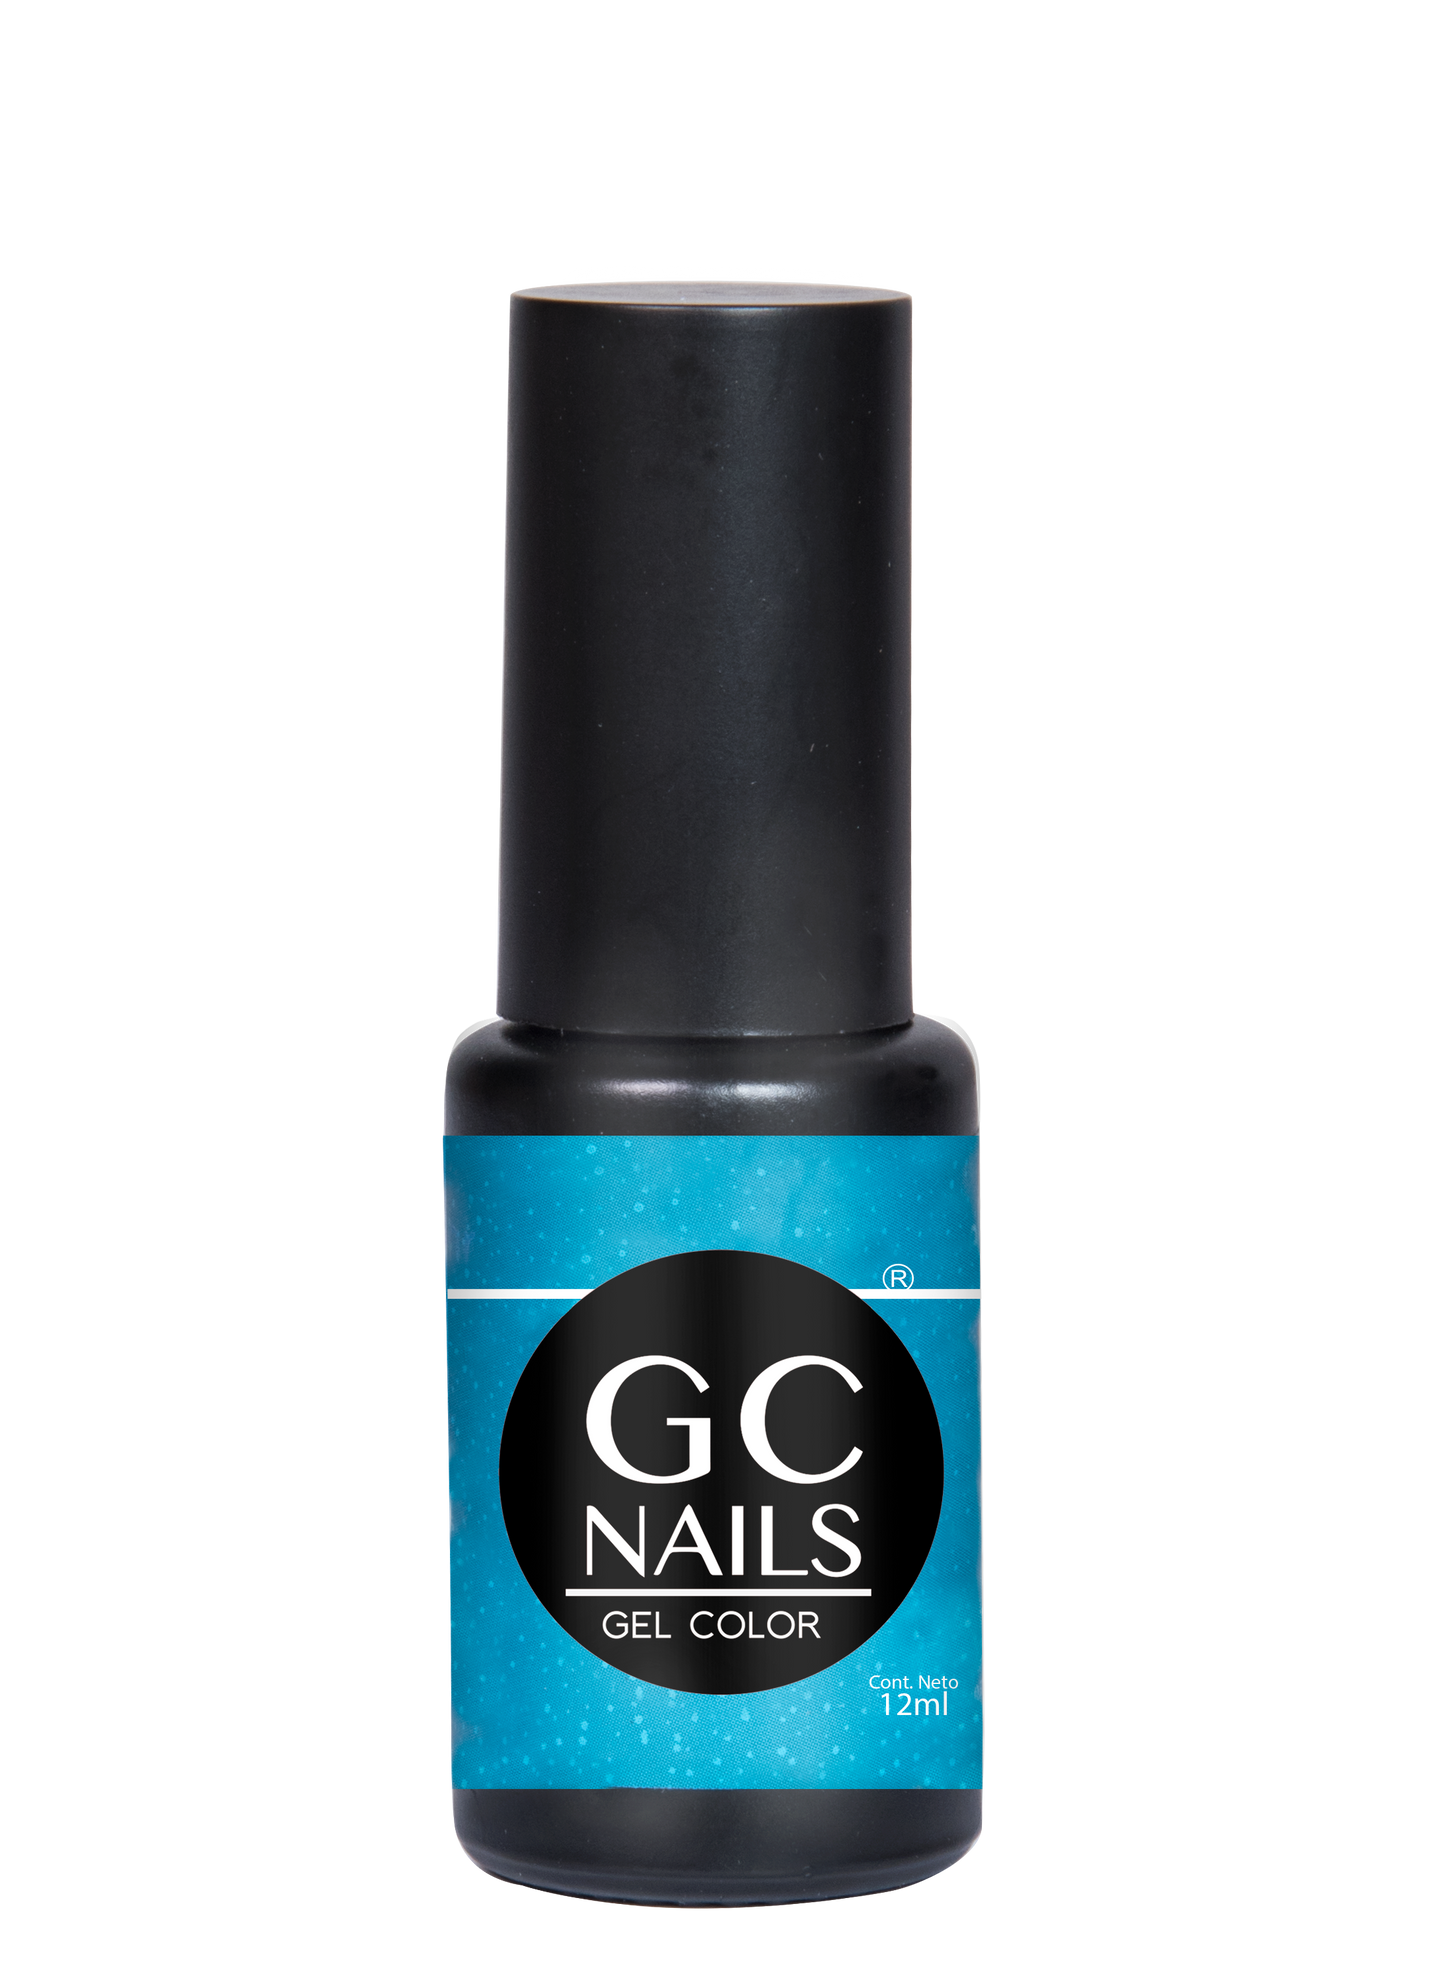 GC nails bel-color 12ml CARIBE 66